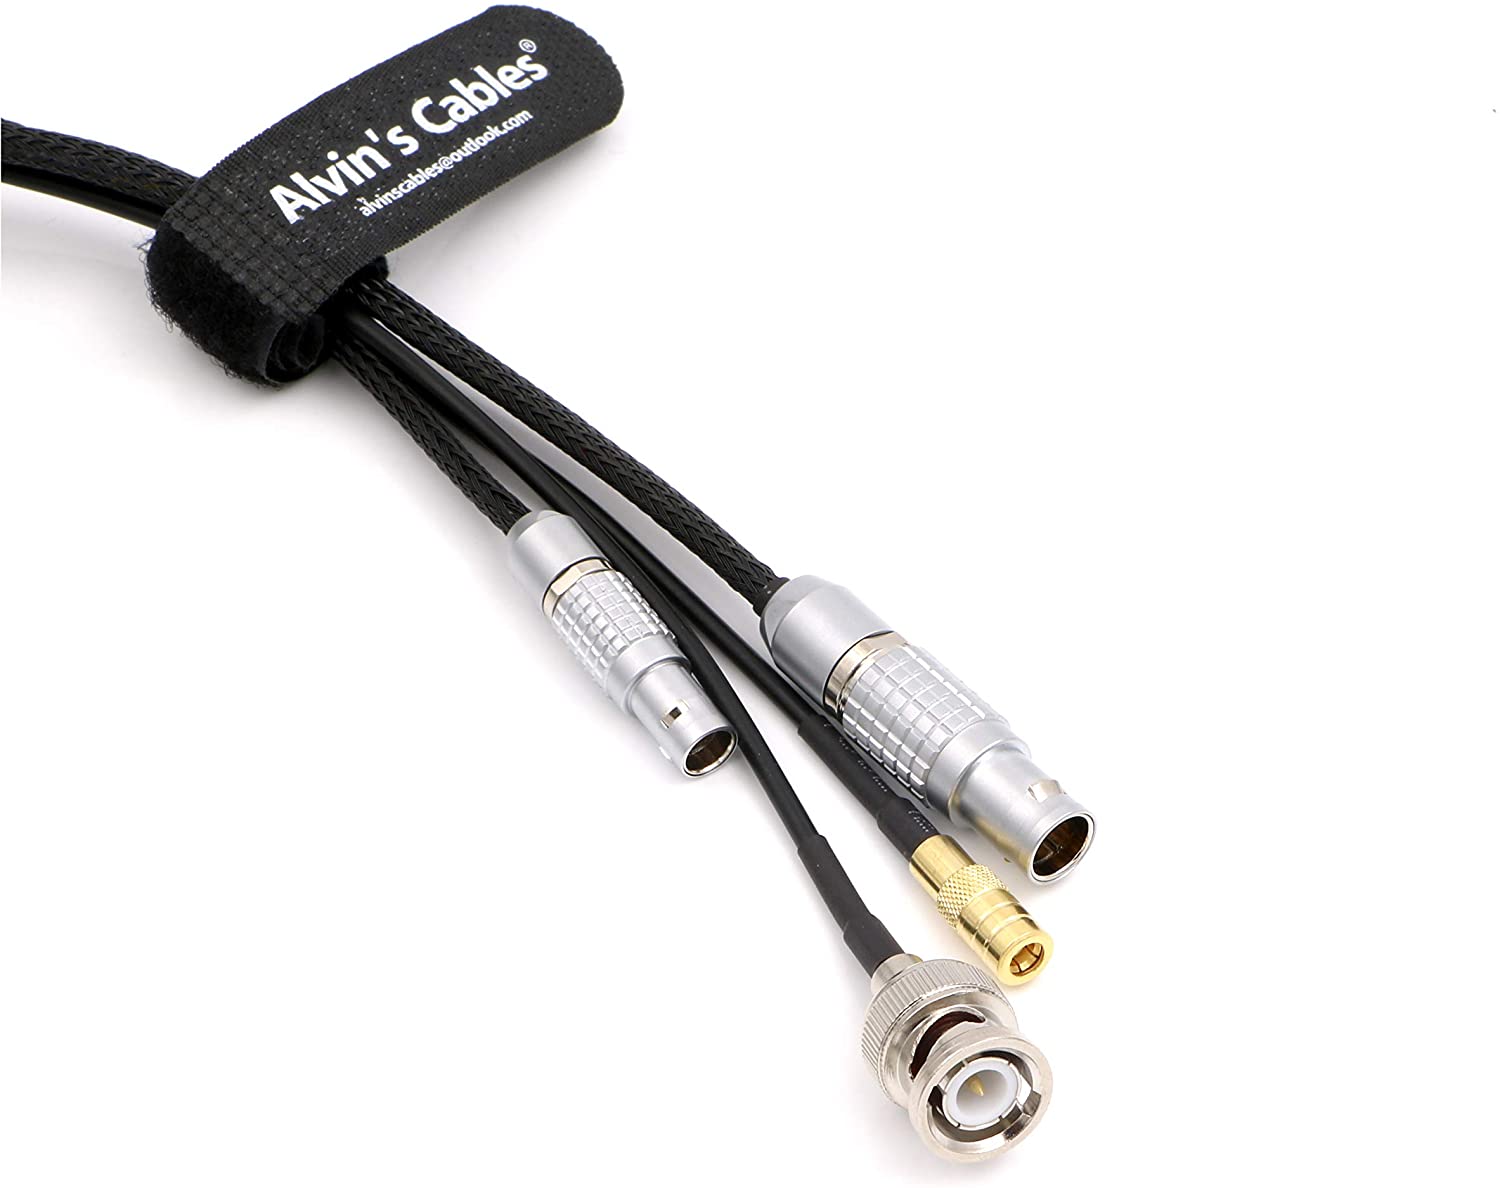 Alvin’s Cables TRINITY Joystick Main Cable with BNC-SMB Cable BNC Male to SMB Female and 1B 8 Pin to 0B 7 Pin Cable Kit for ARRI TRINITY Joystick K2.0014805 43in/110cm